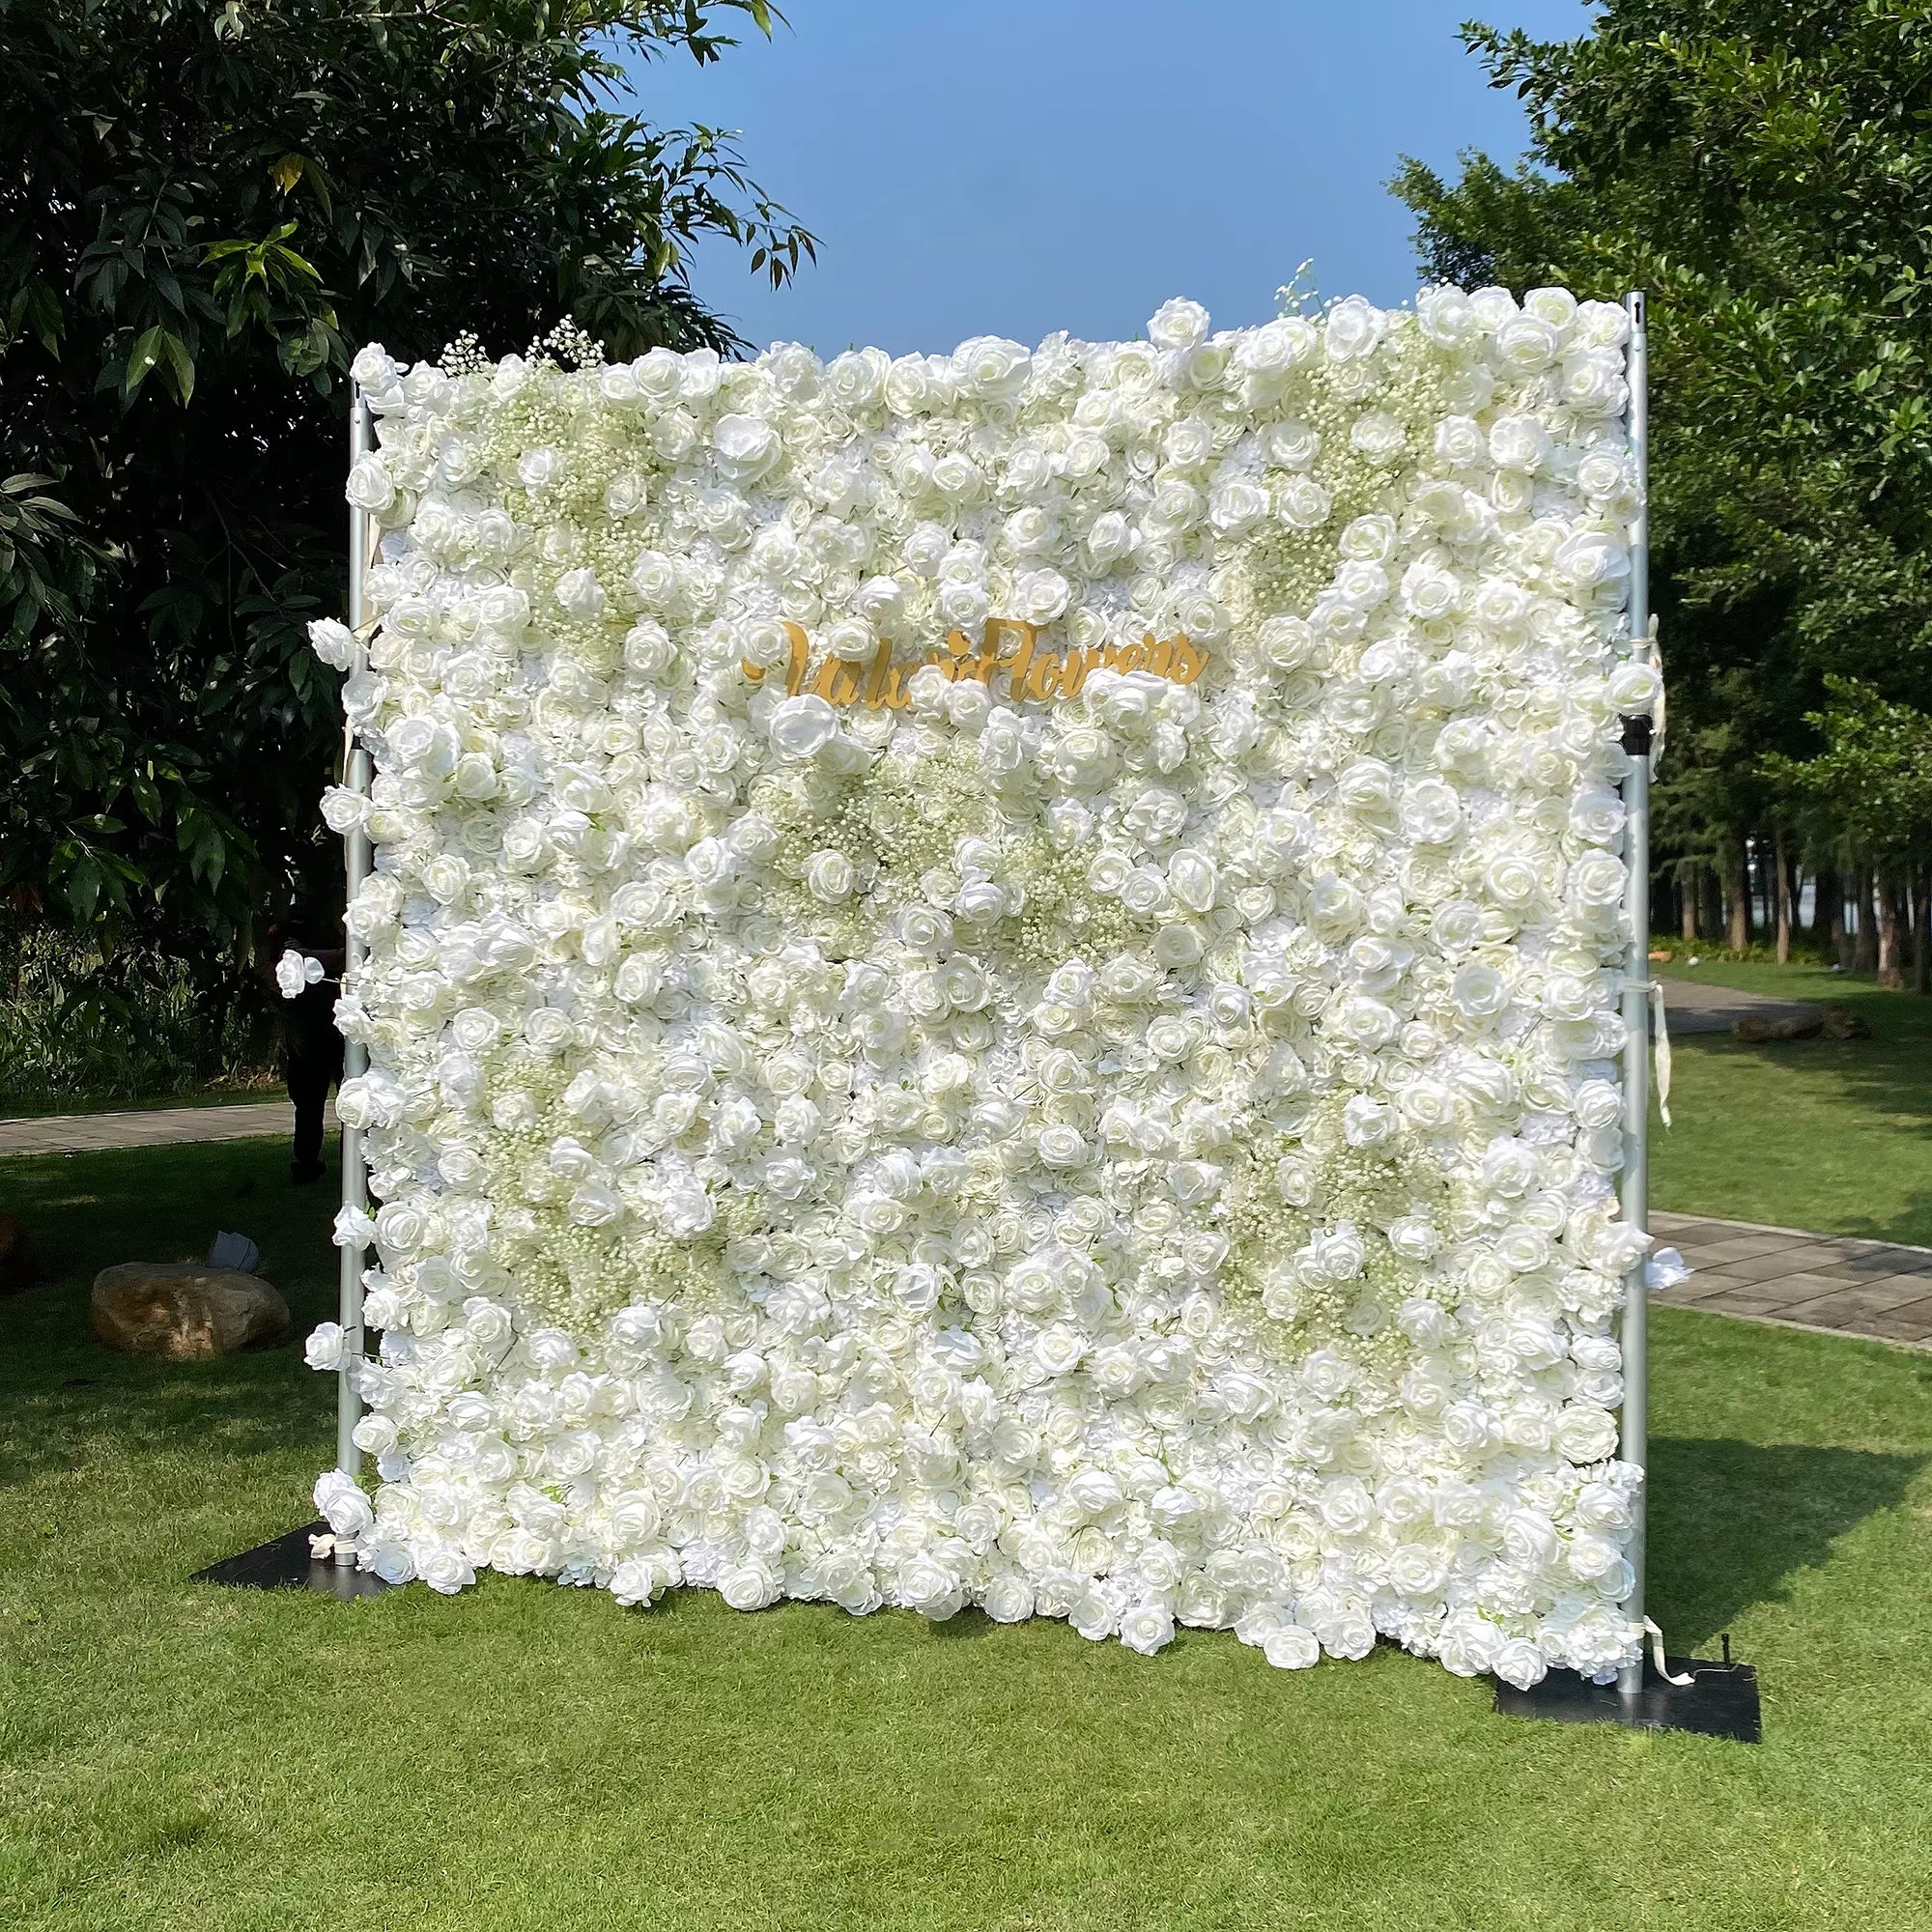 Elegant White &amp; Green Flower Wall Backdrop - Roll-Up Fabric Wall - Bridal Party Decor - Wedding Venues Celebration Floral Wall-VF-340-2